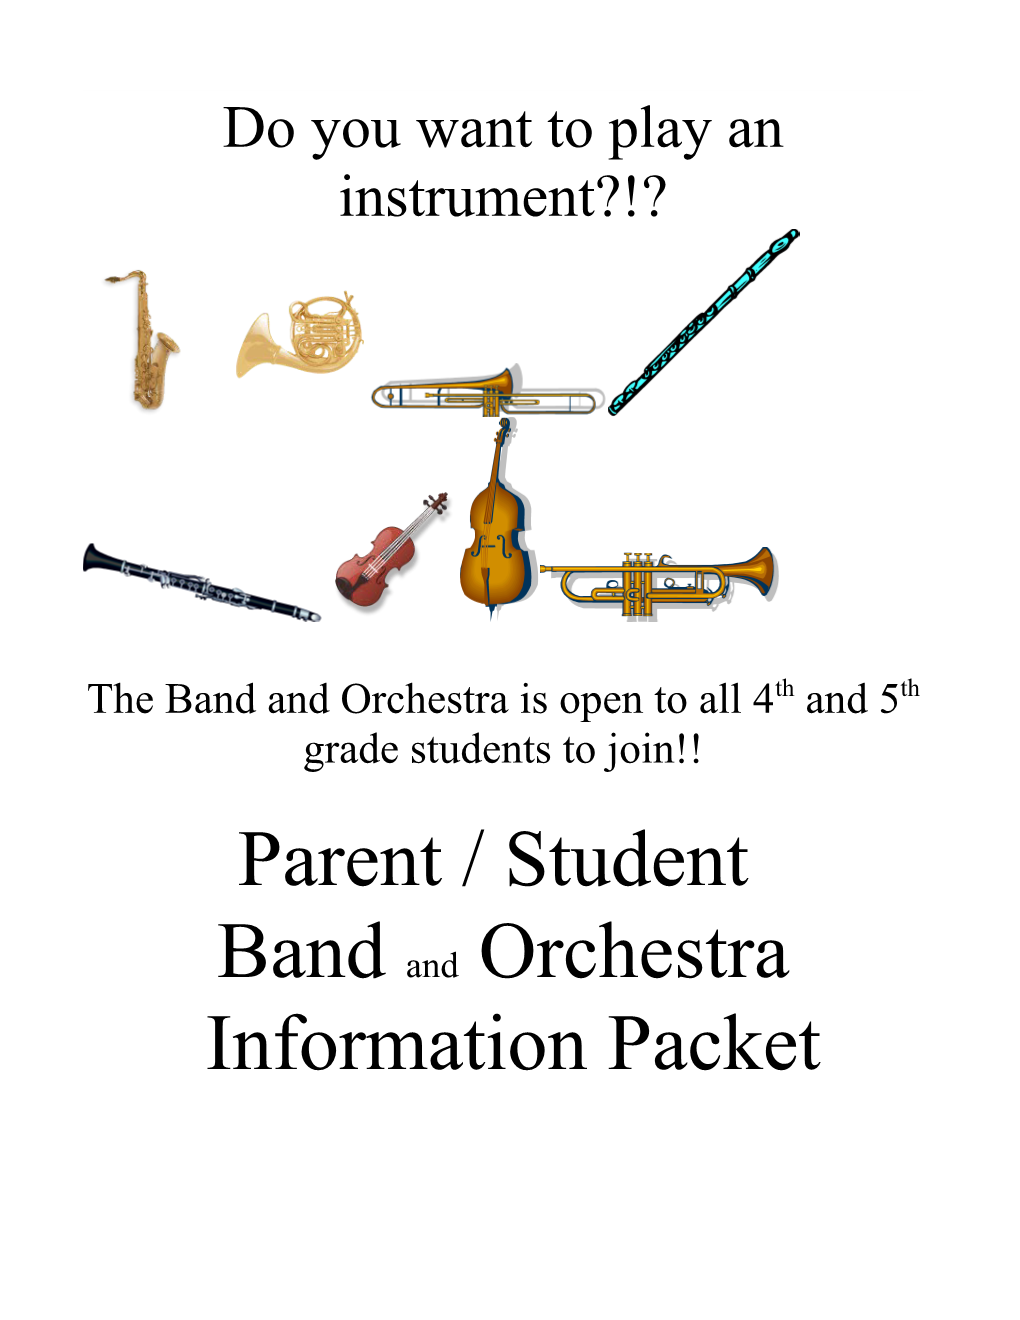 Do You Want to Play an Instrument?!?